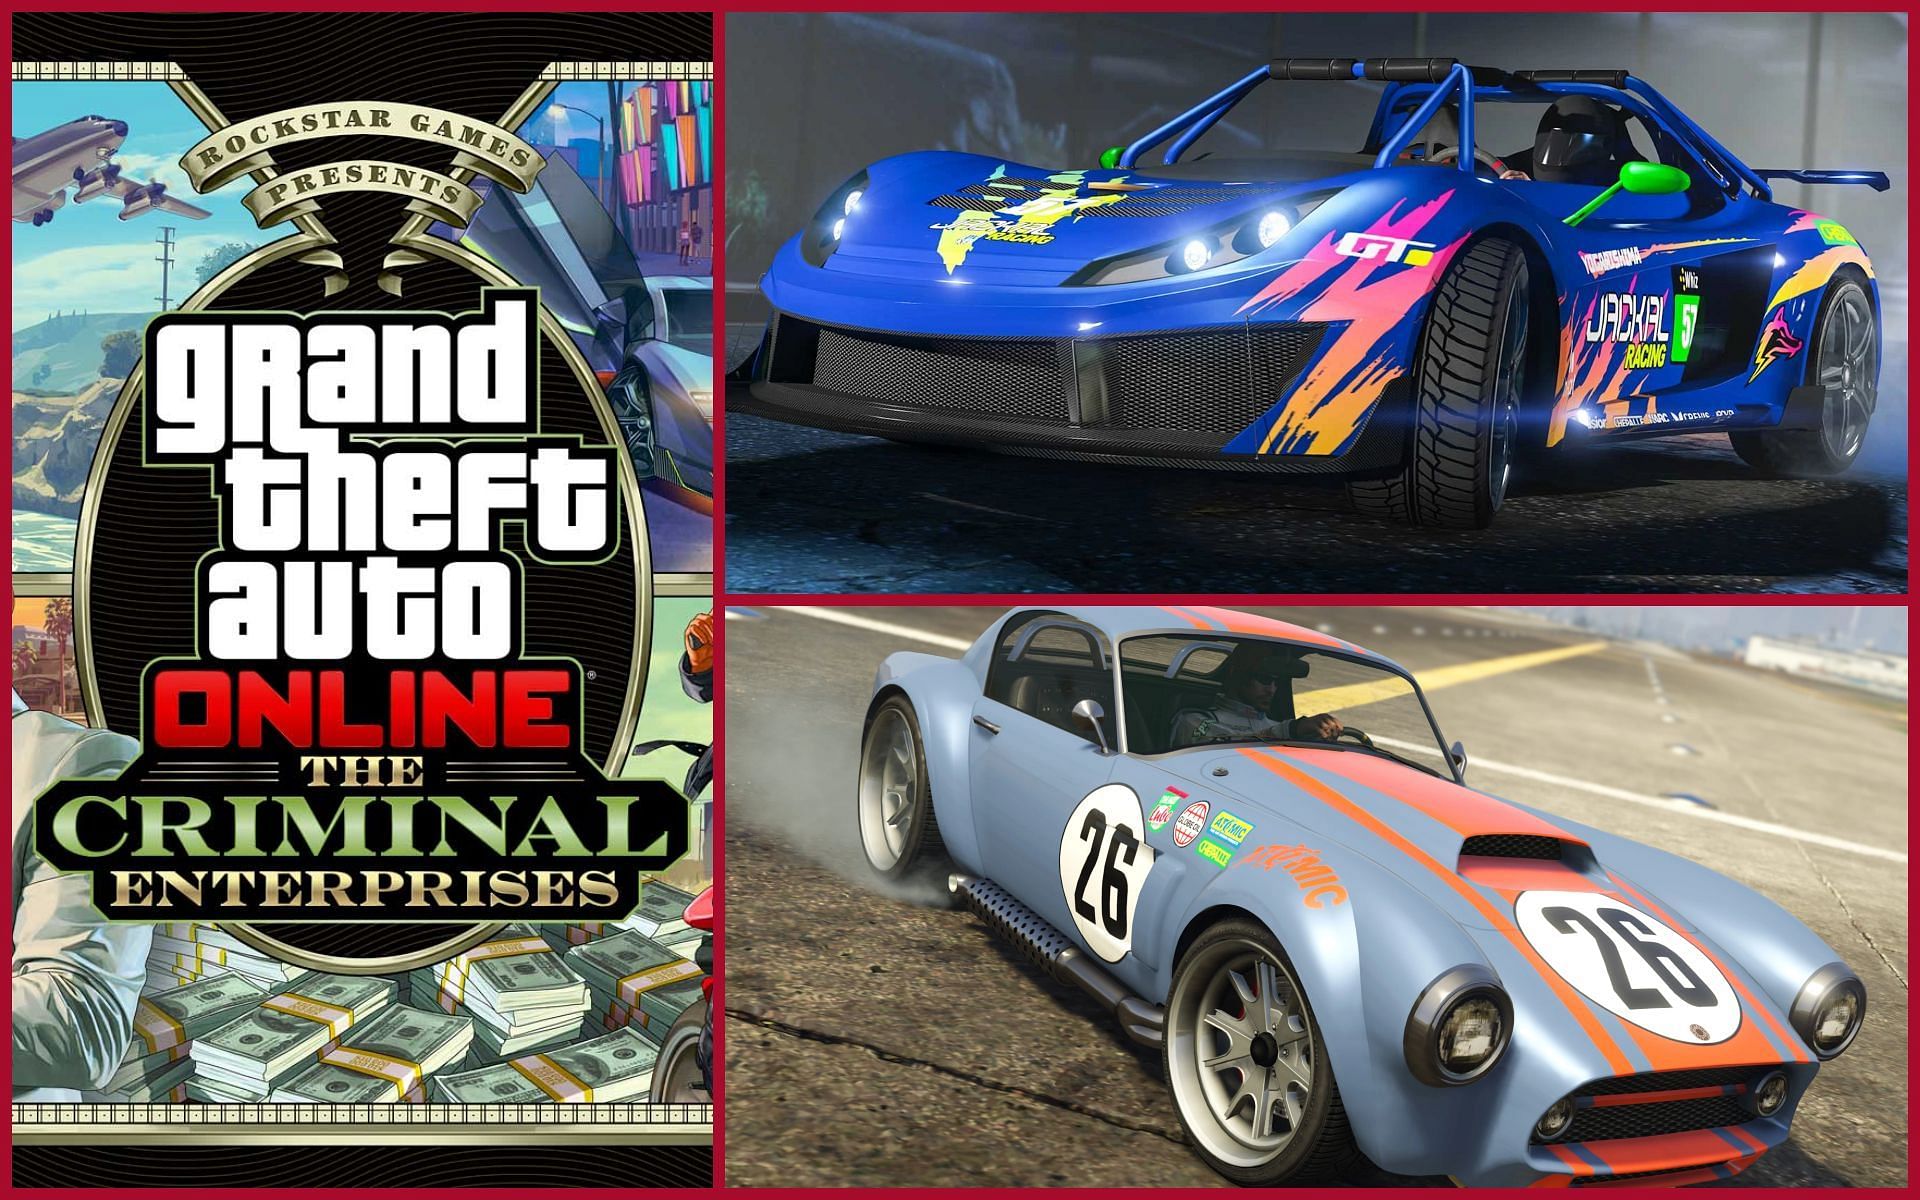 GTA Online Prize and Podium ride revealed